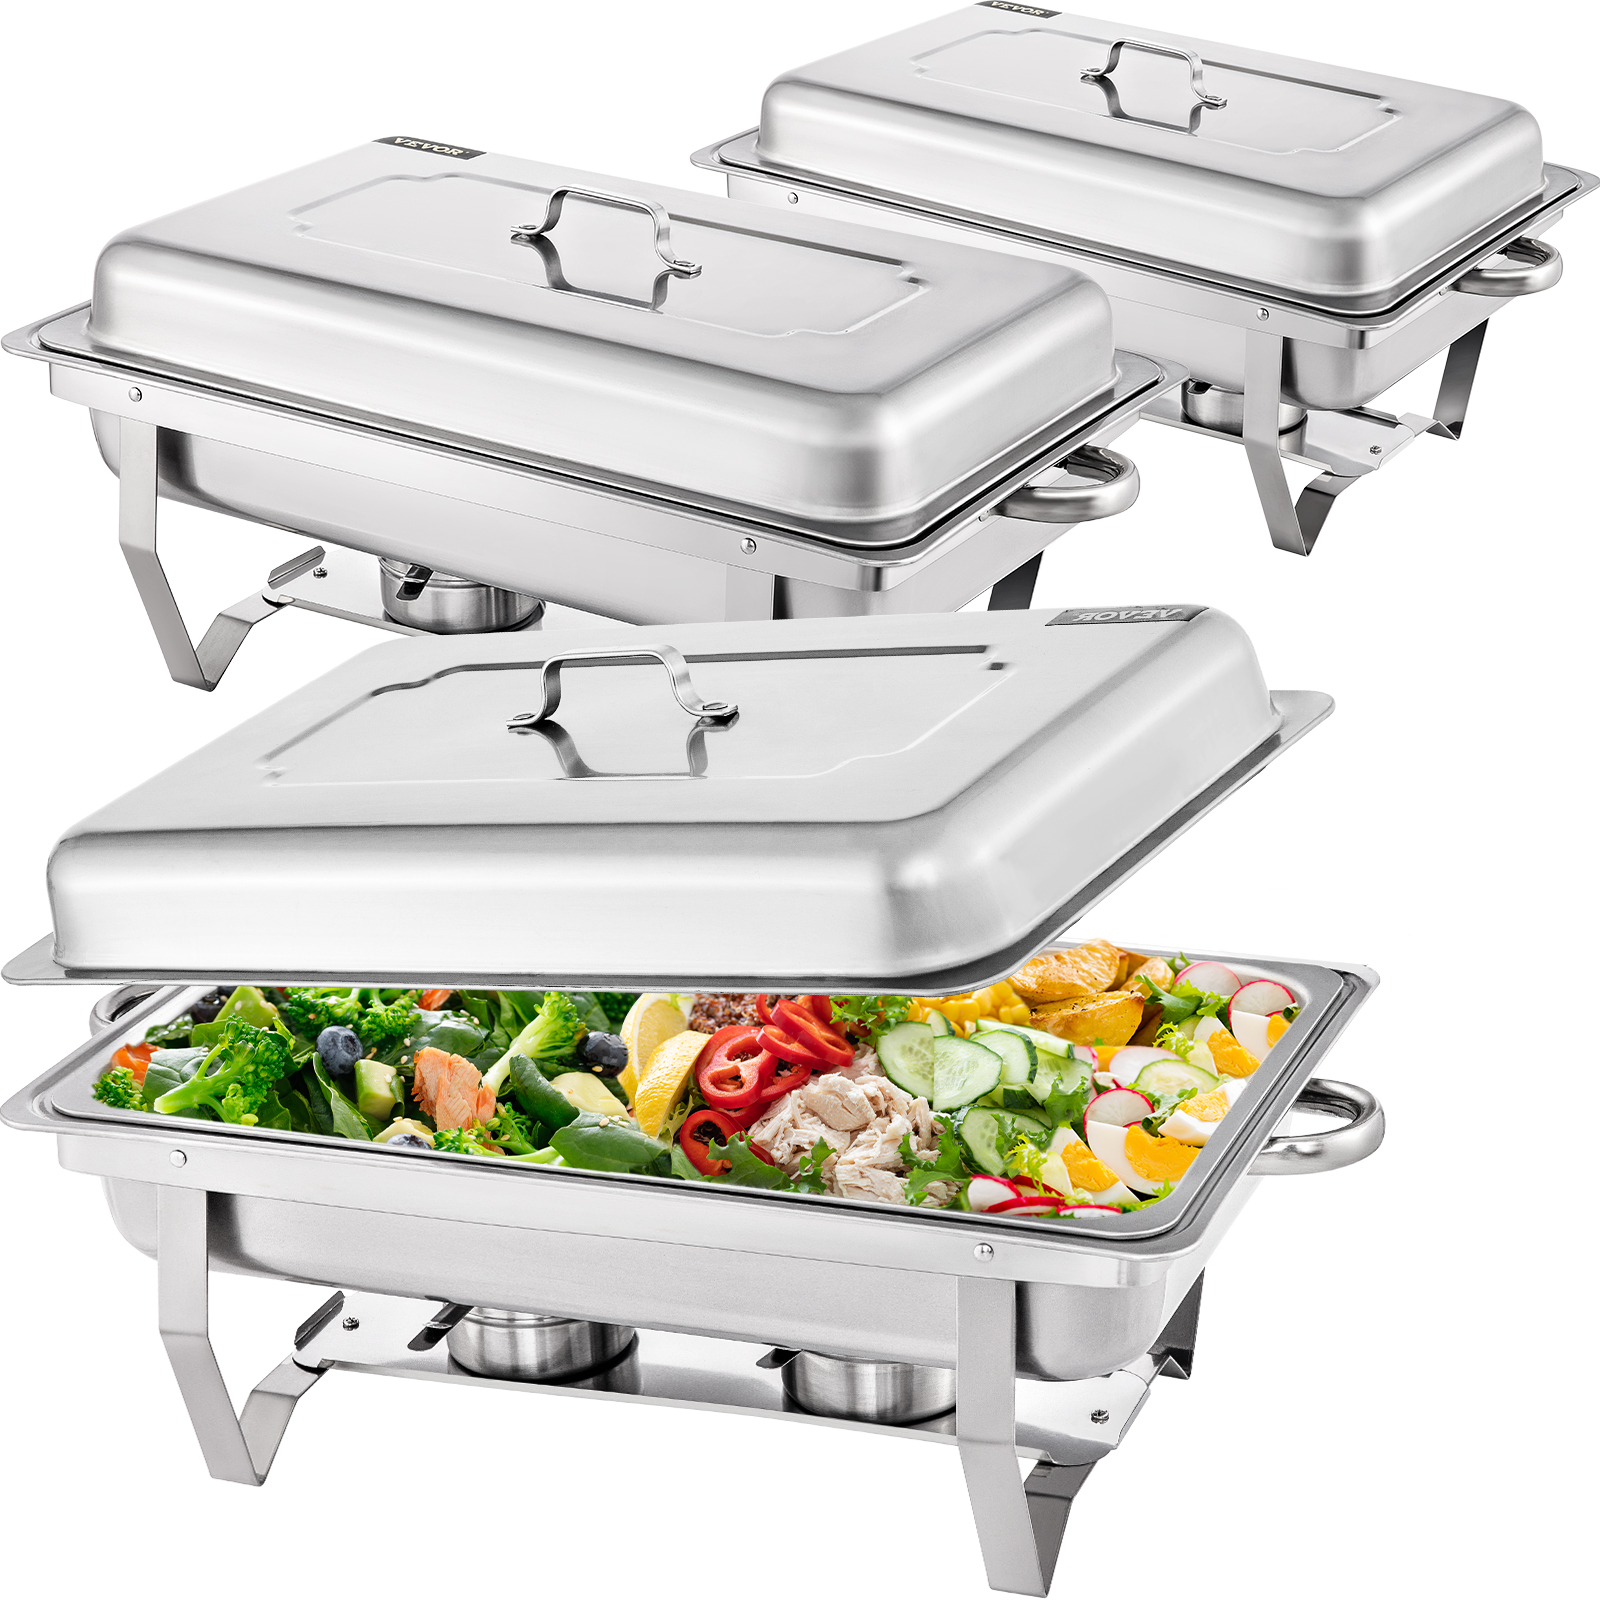 3 PACK Catering Classic STAINLESS STEEL Chafer Chafing Dish Set 8 QT Buffet Full 